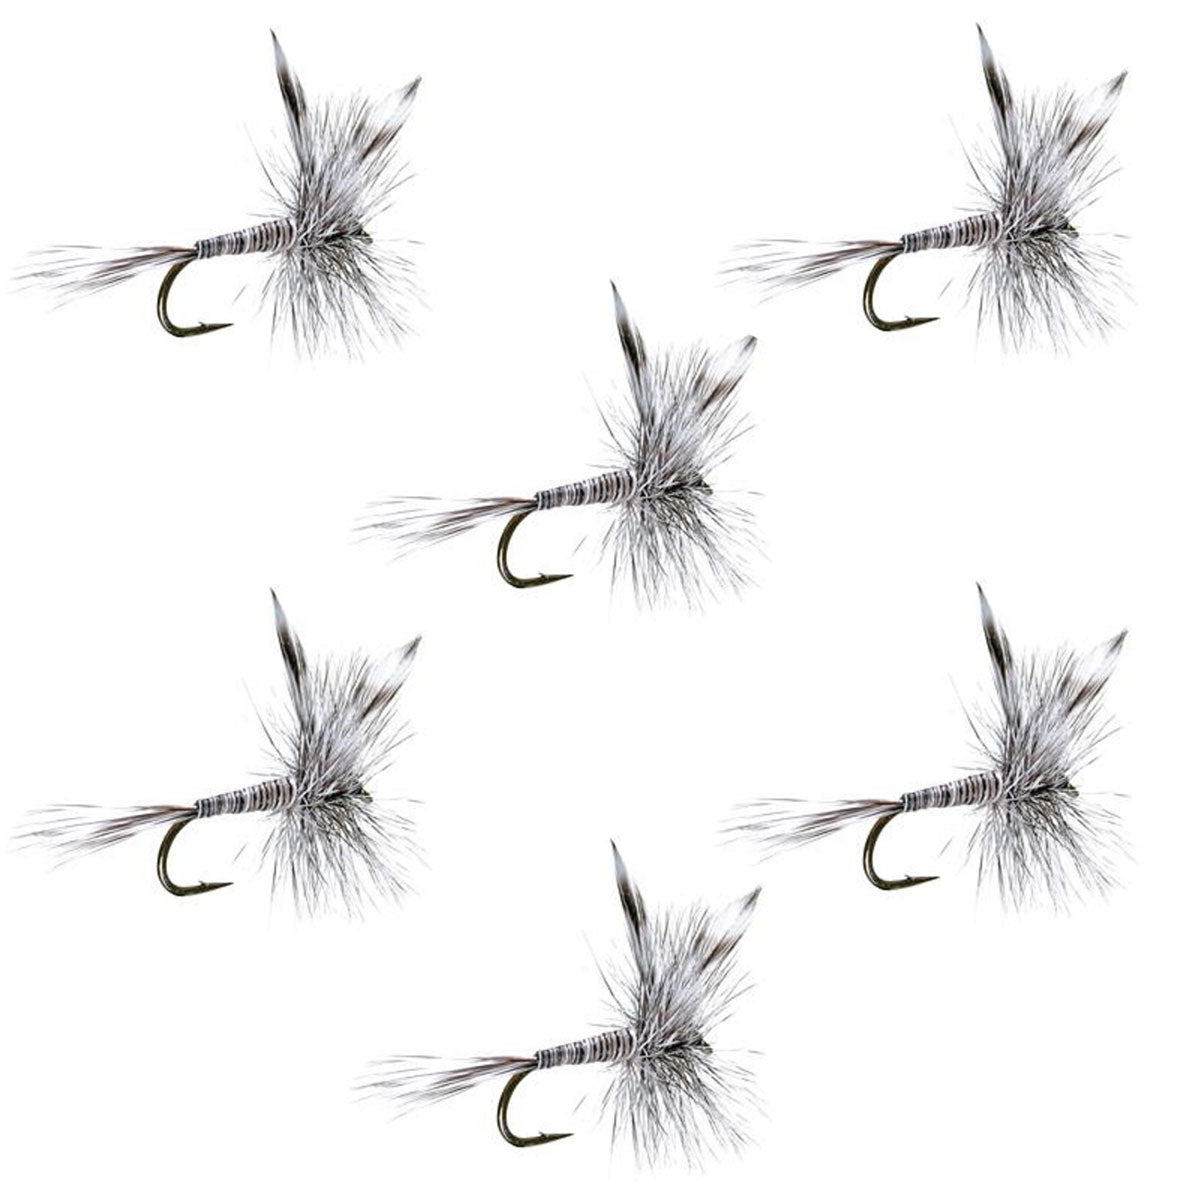 Mosquito Classic Trout Dry Fly Fishing Flies - Set of 6 Flies Size 18